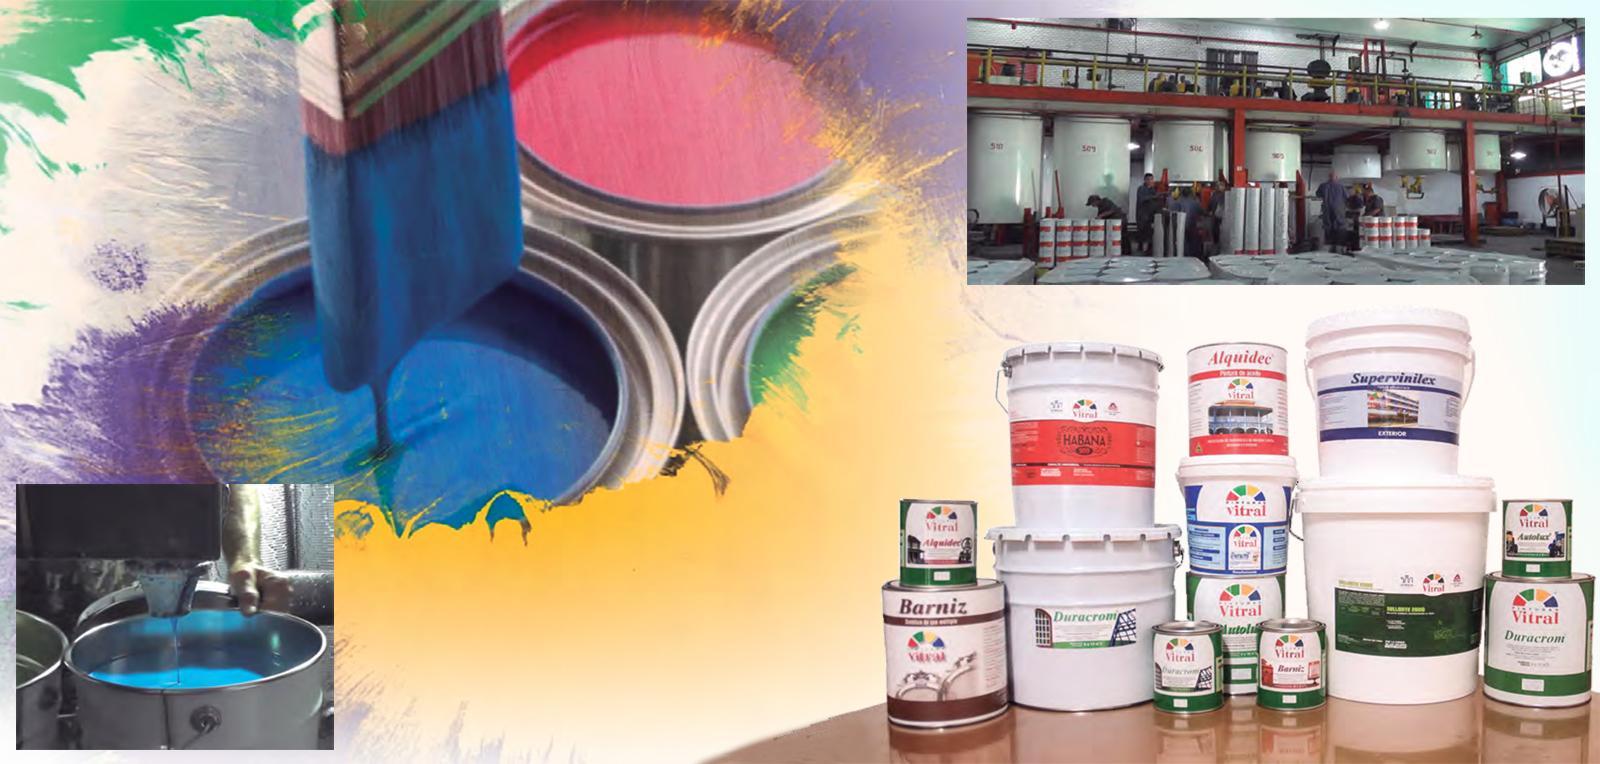 Vitral Paints celebrates 35 years of efficient work